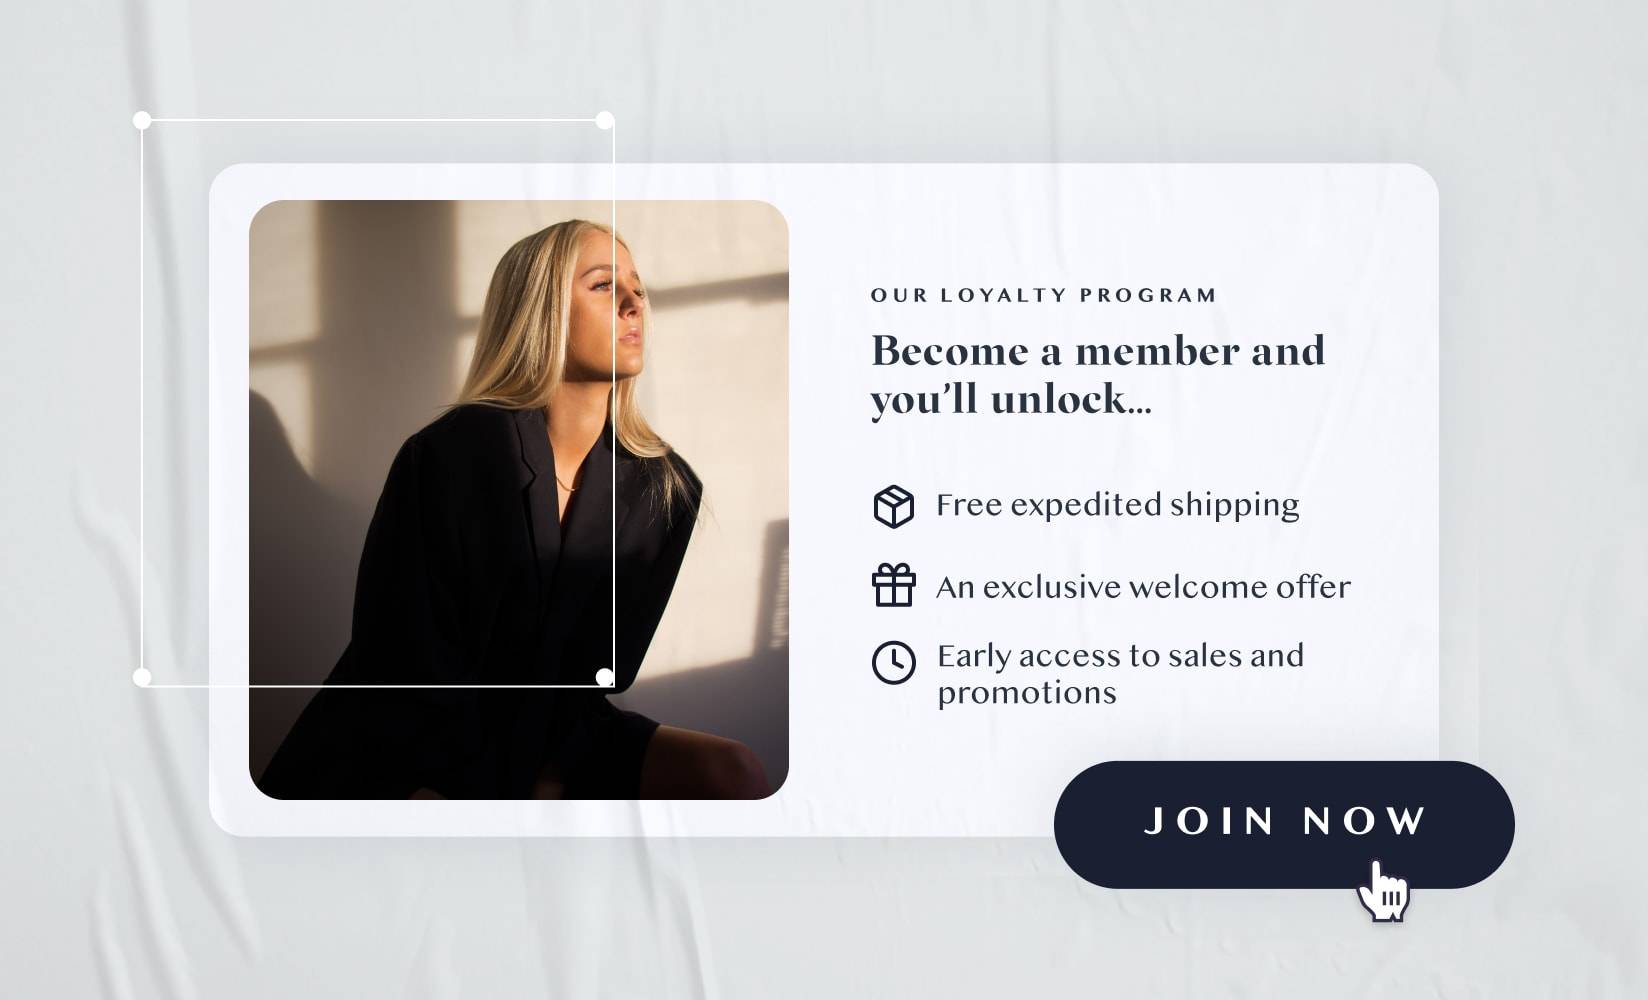 Incentivize longer subscriptions by unlocking free shipping after